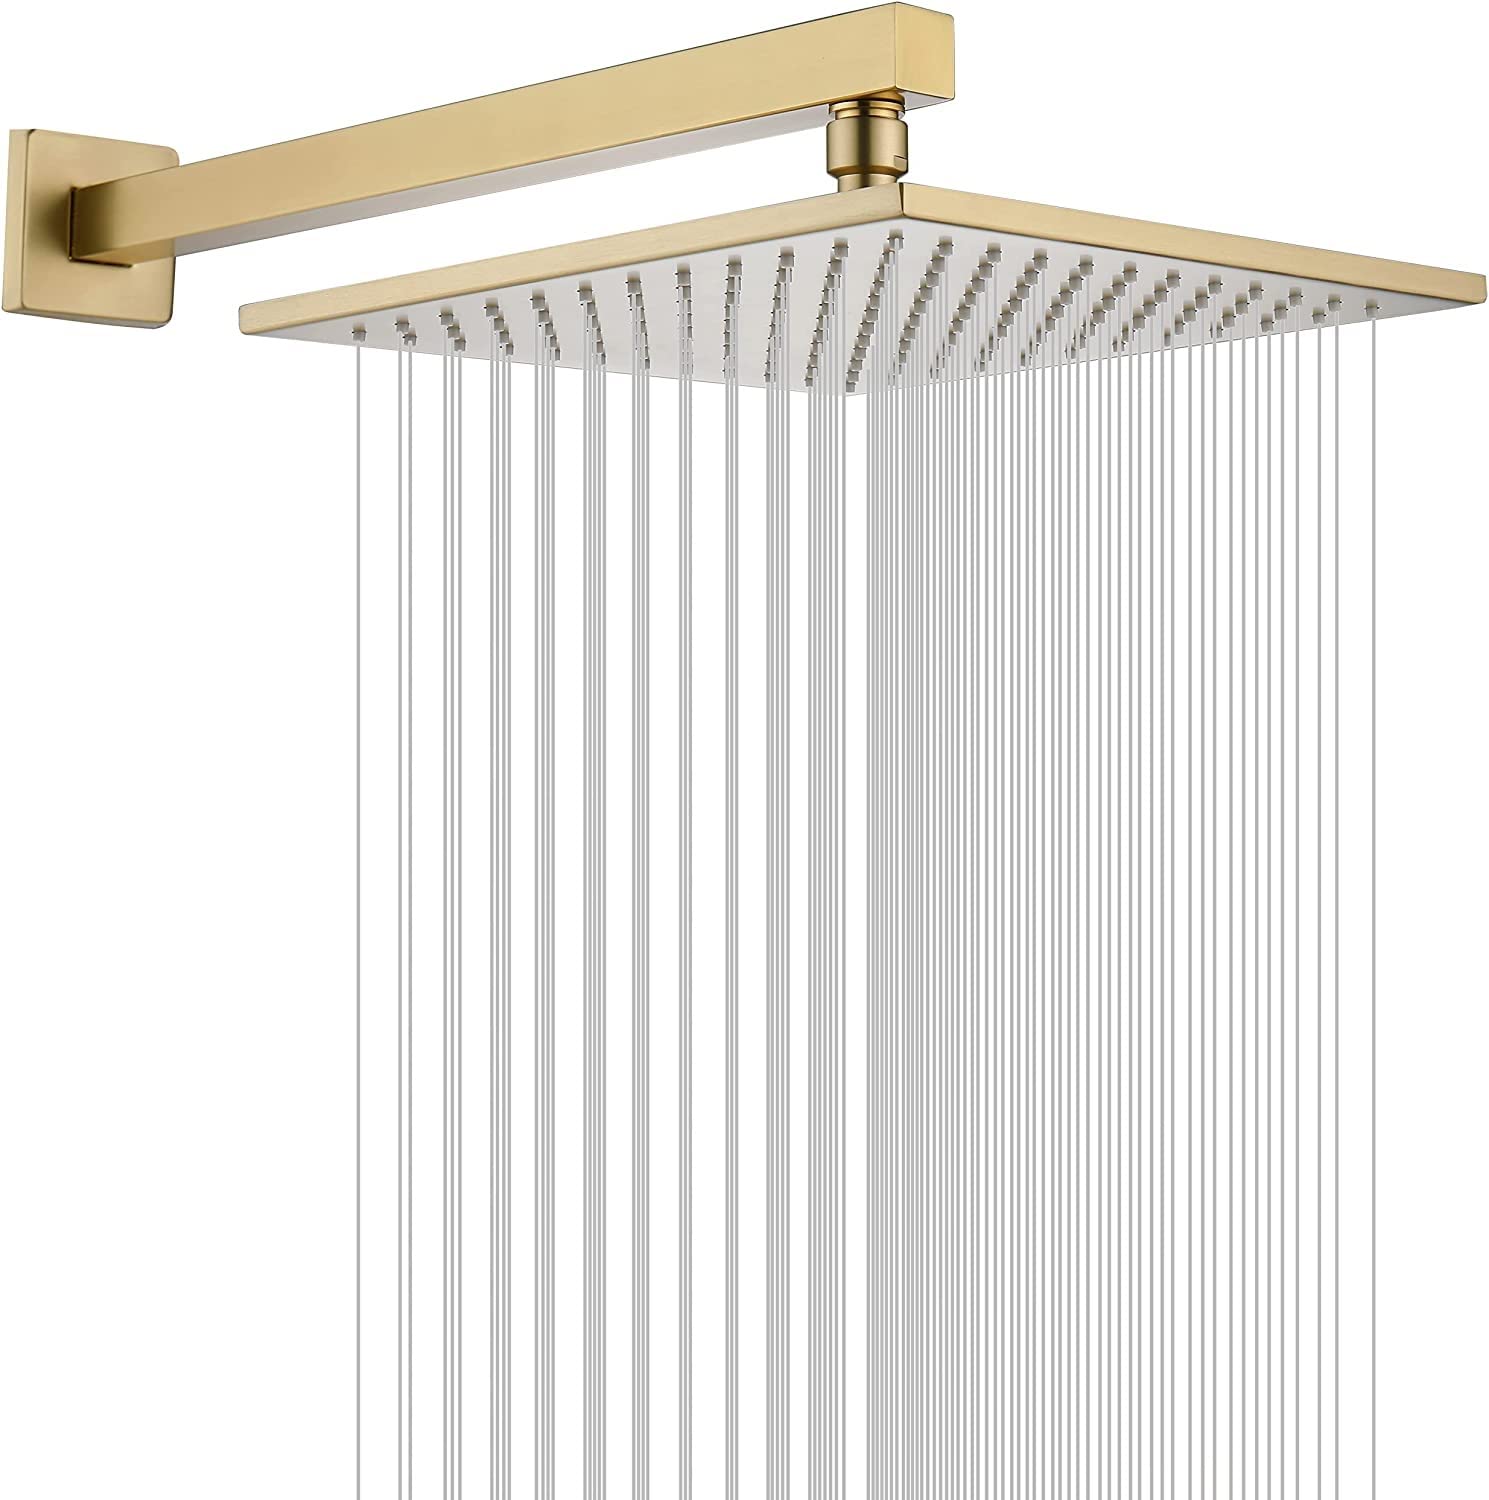 Marcoware SS Breezo Heavy Duty Bathroom Overhead Shower Head, 8 Inches, Gold, Polished Finish - Marcoware